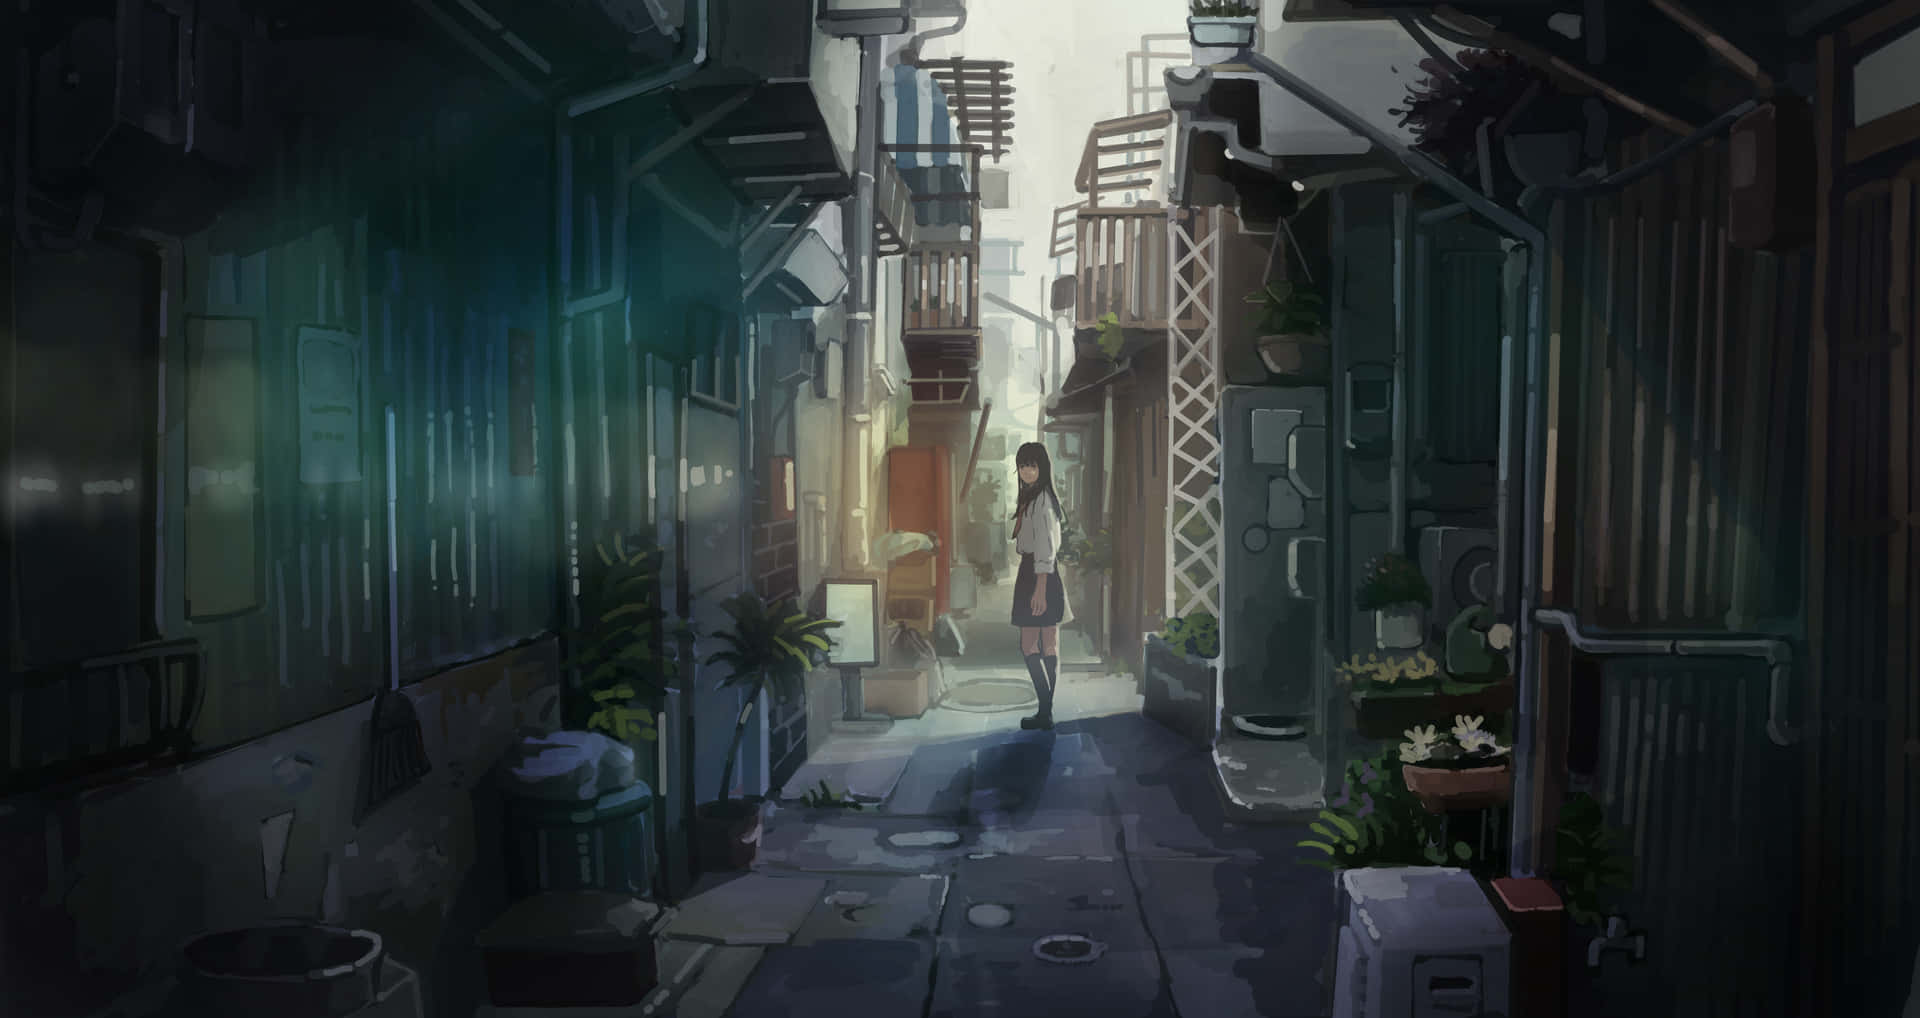 all rendered in a Japanese animation style. The alleyway is a bustling  scene of life